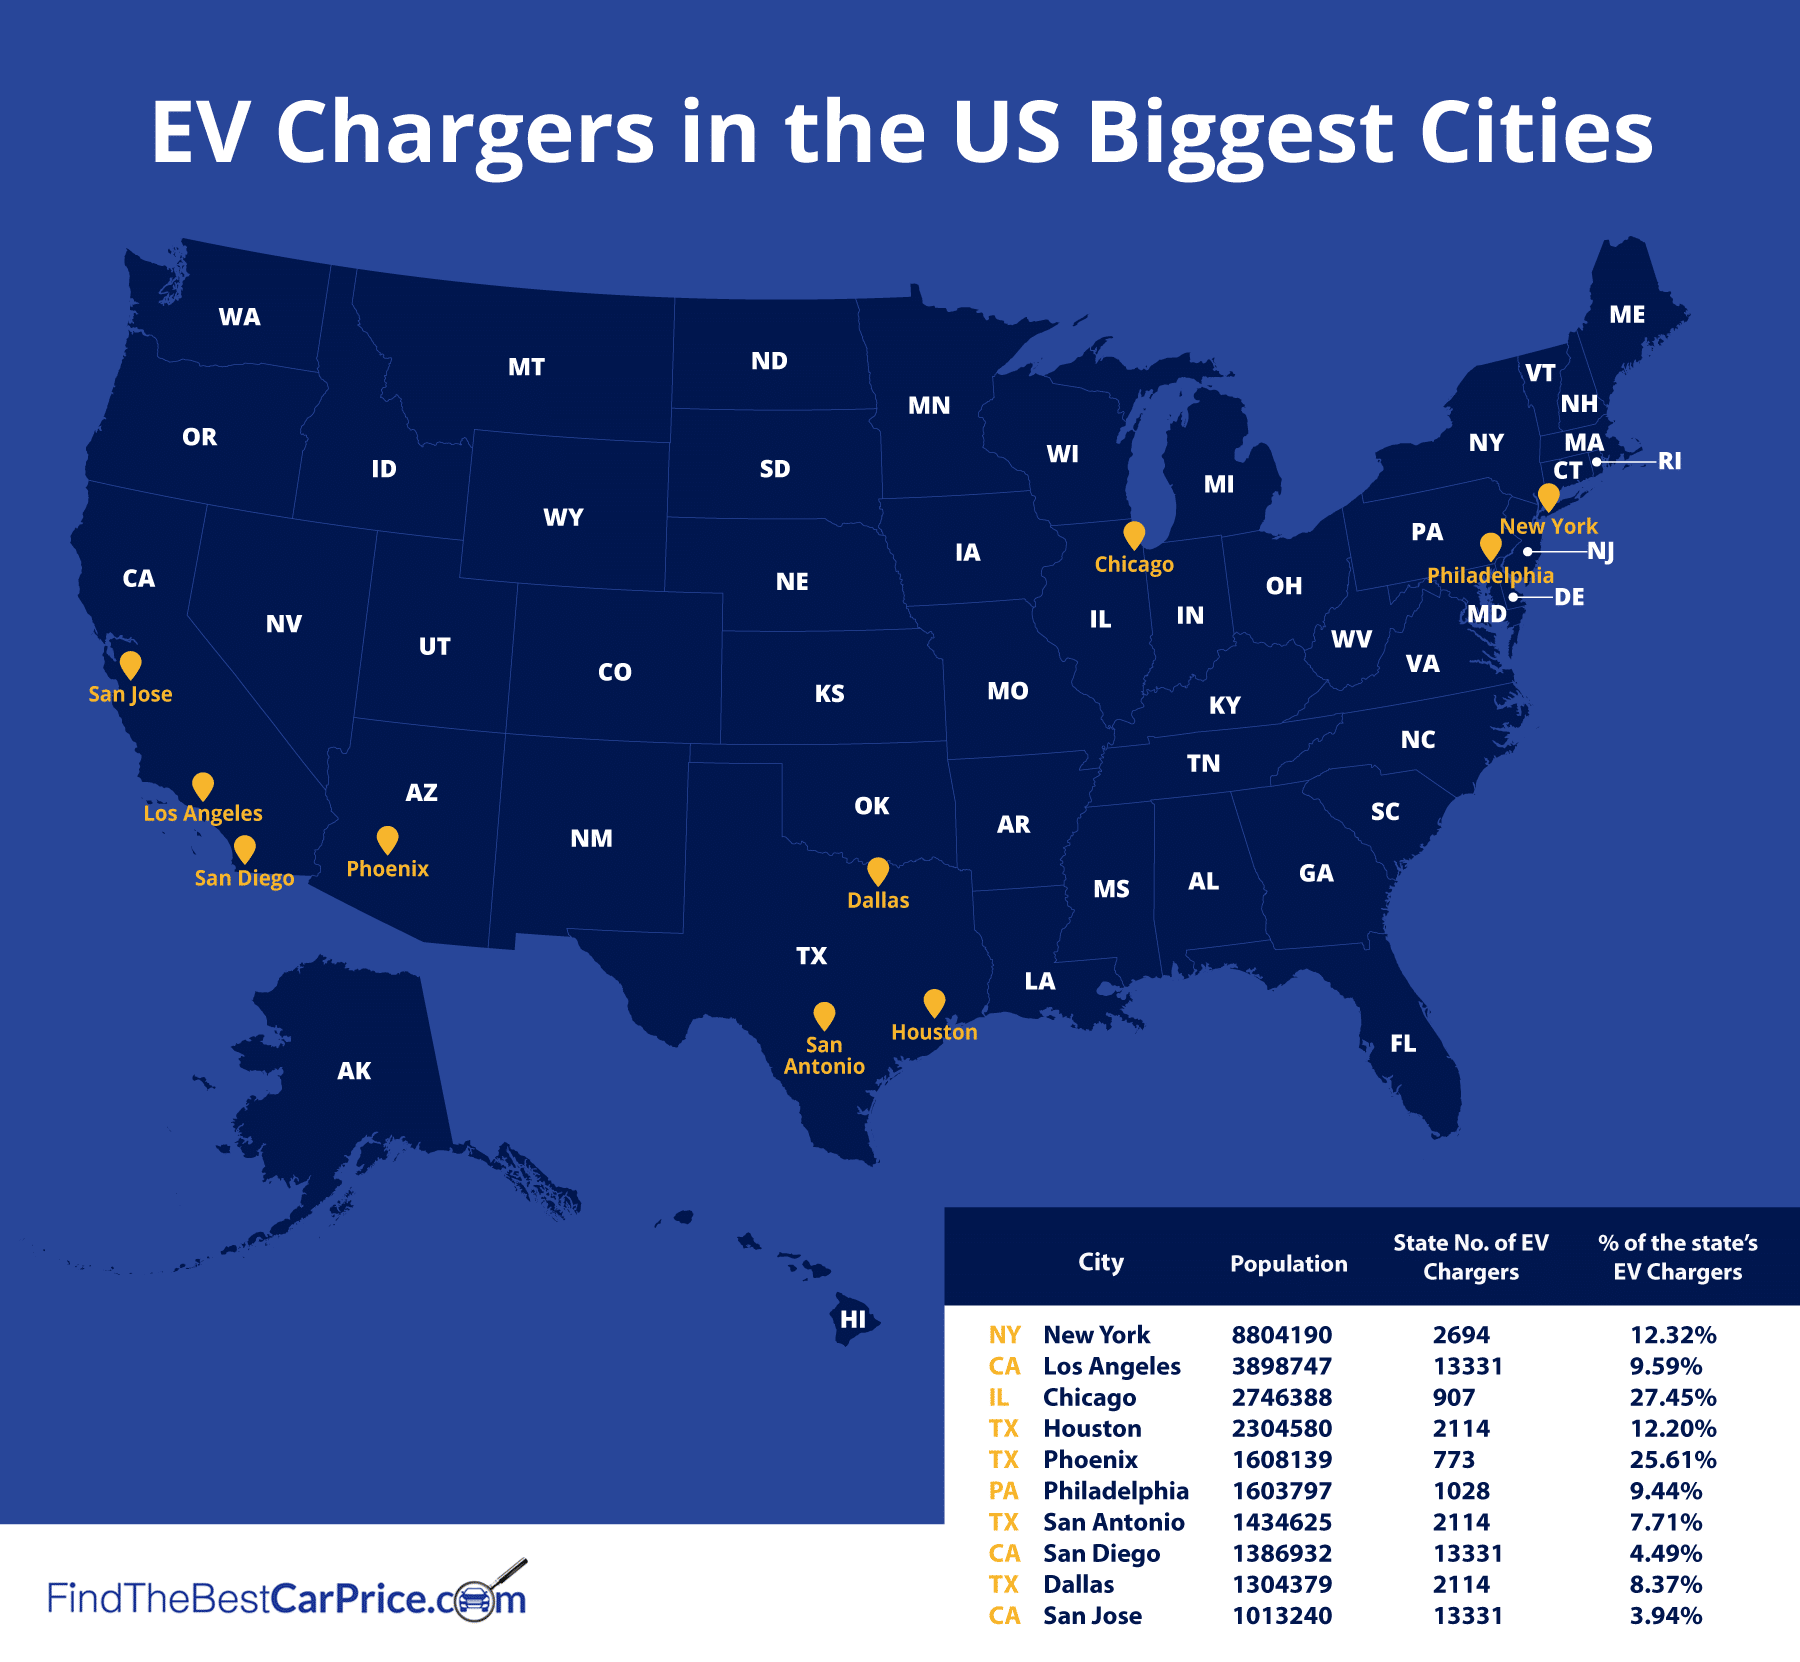 EV Chargers in Biggest Cities